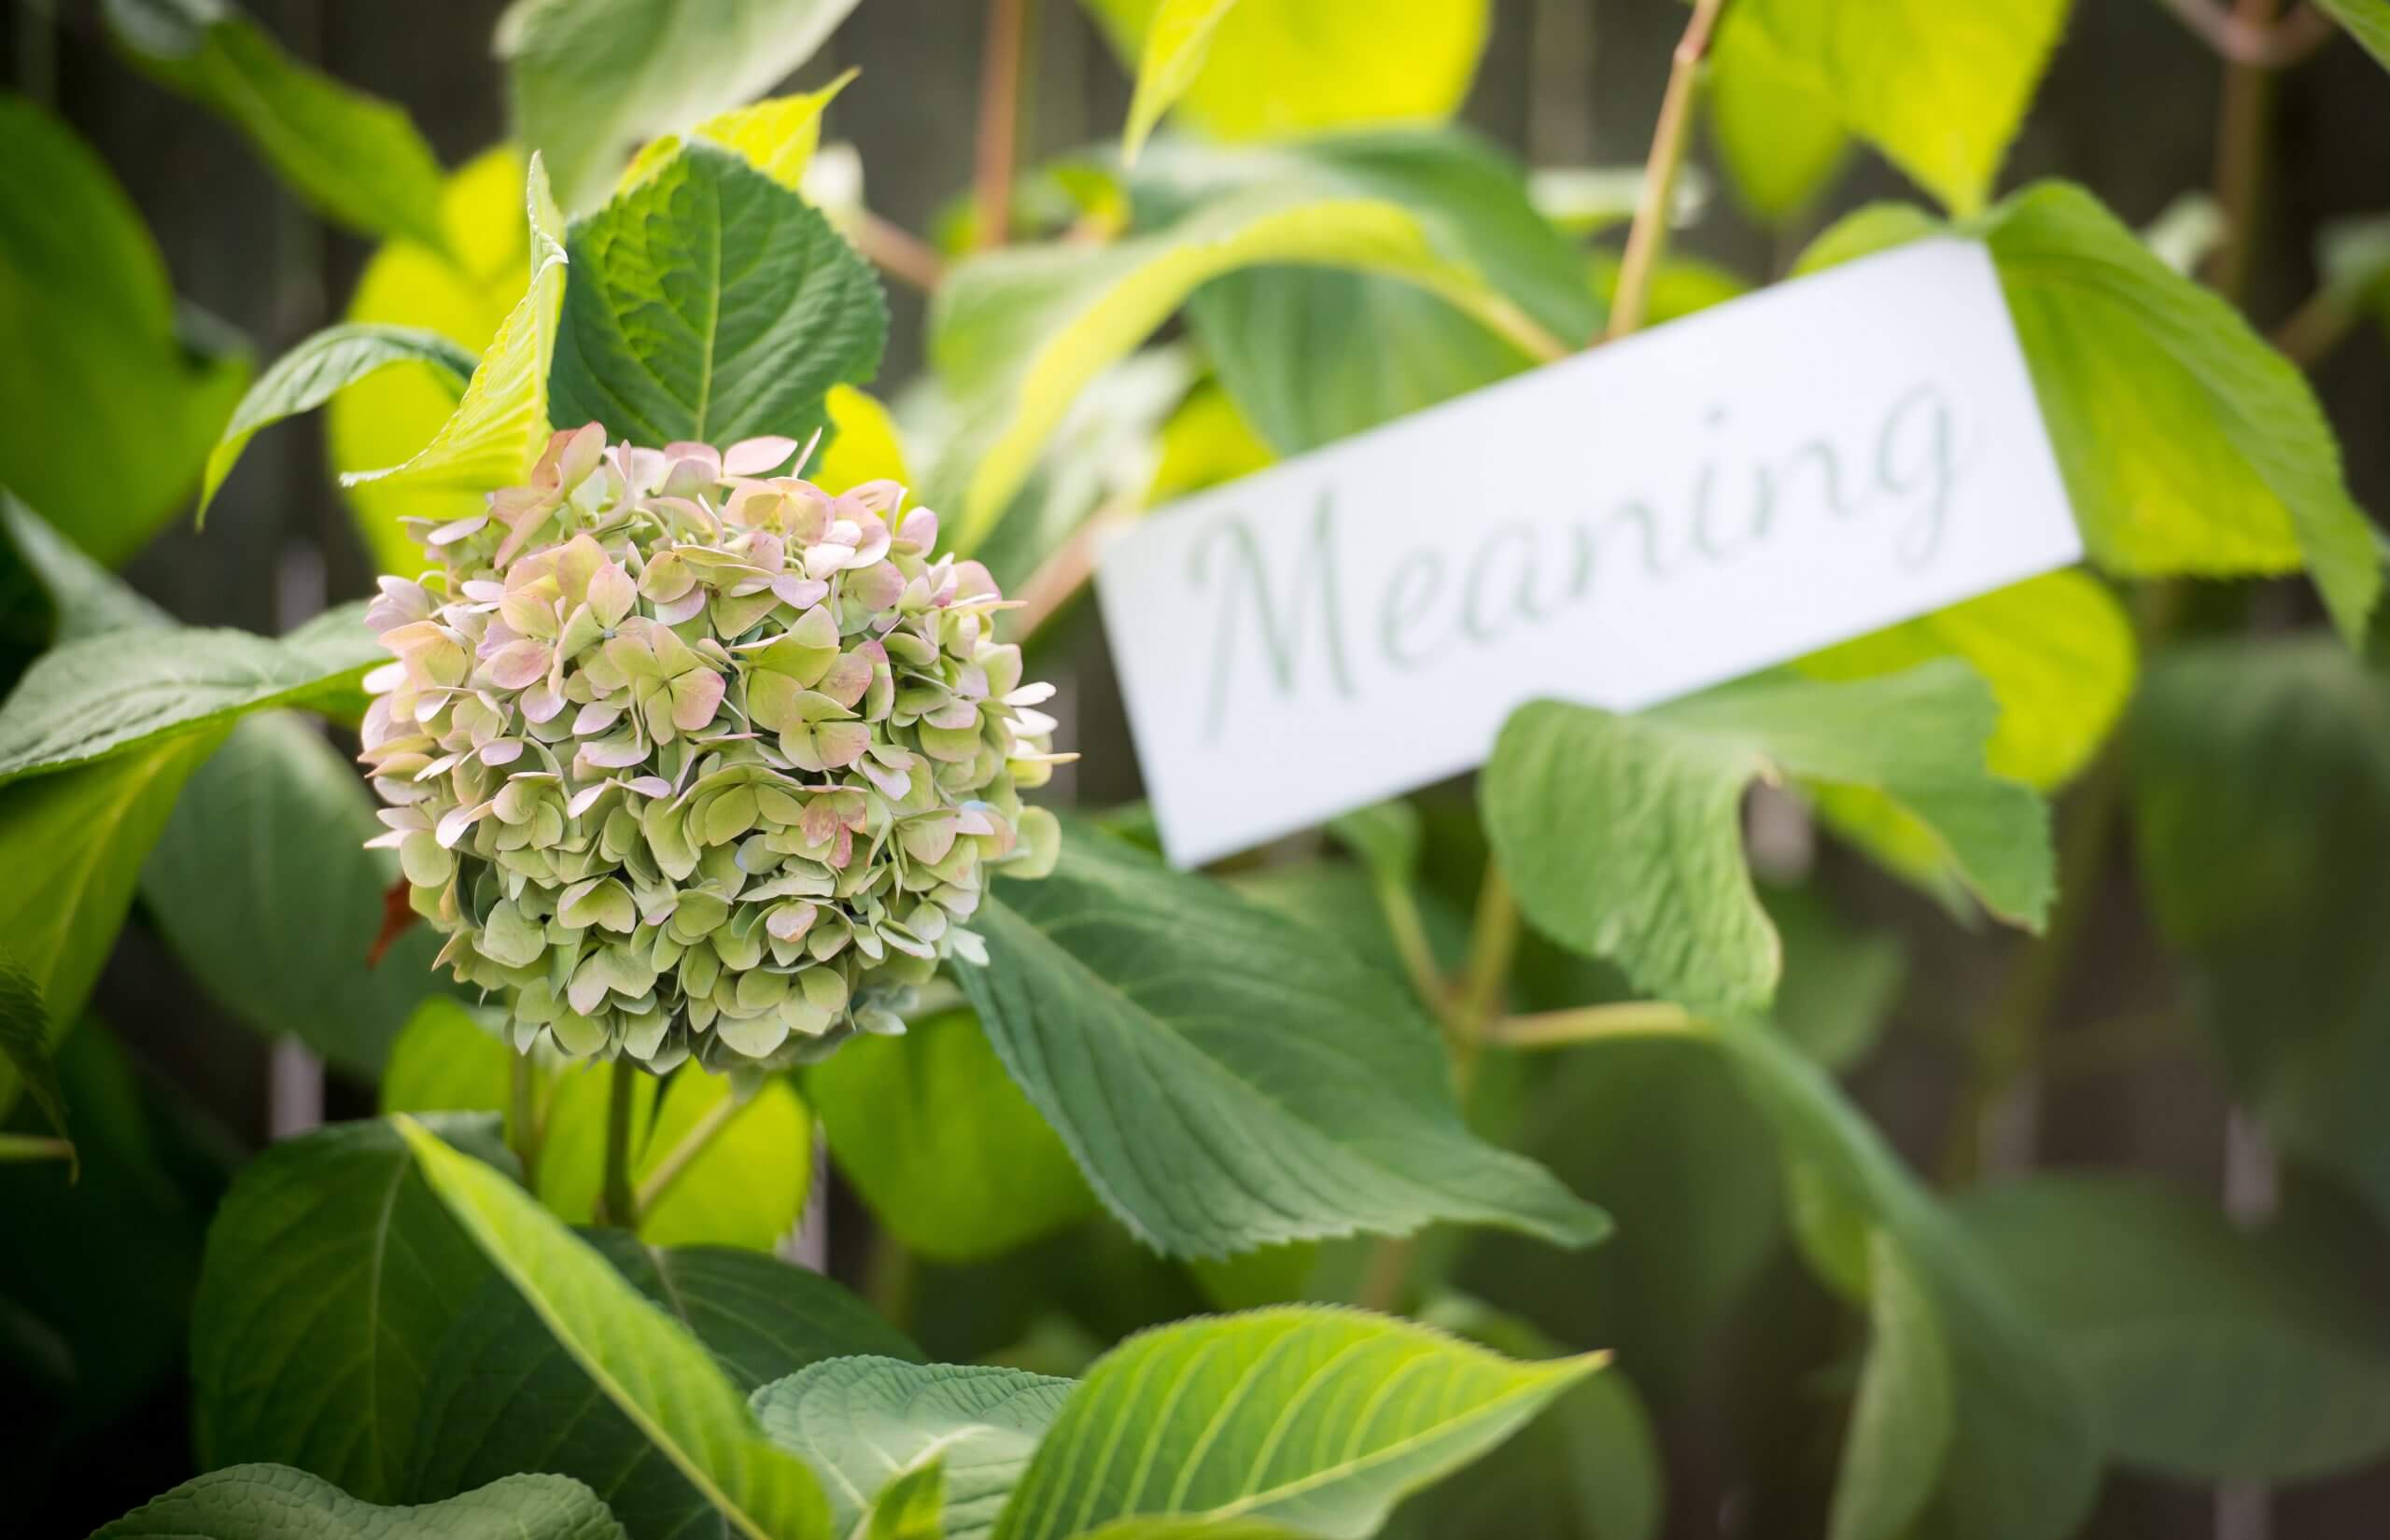 A focused view of a hydrangea flower in front of an unfocused view of a sign with the word "meaning."